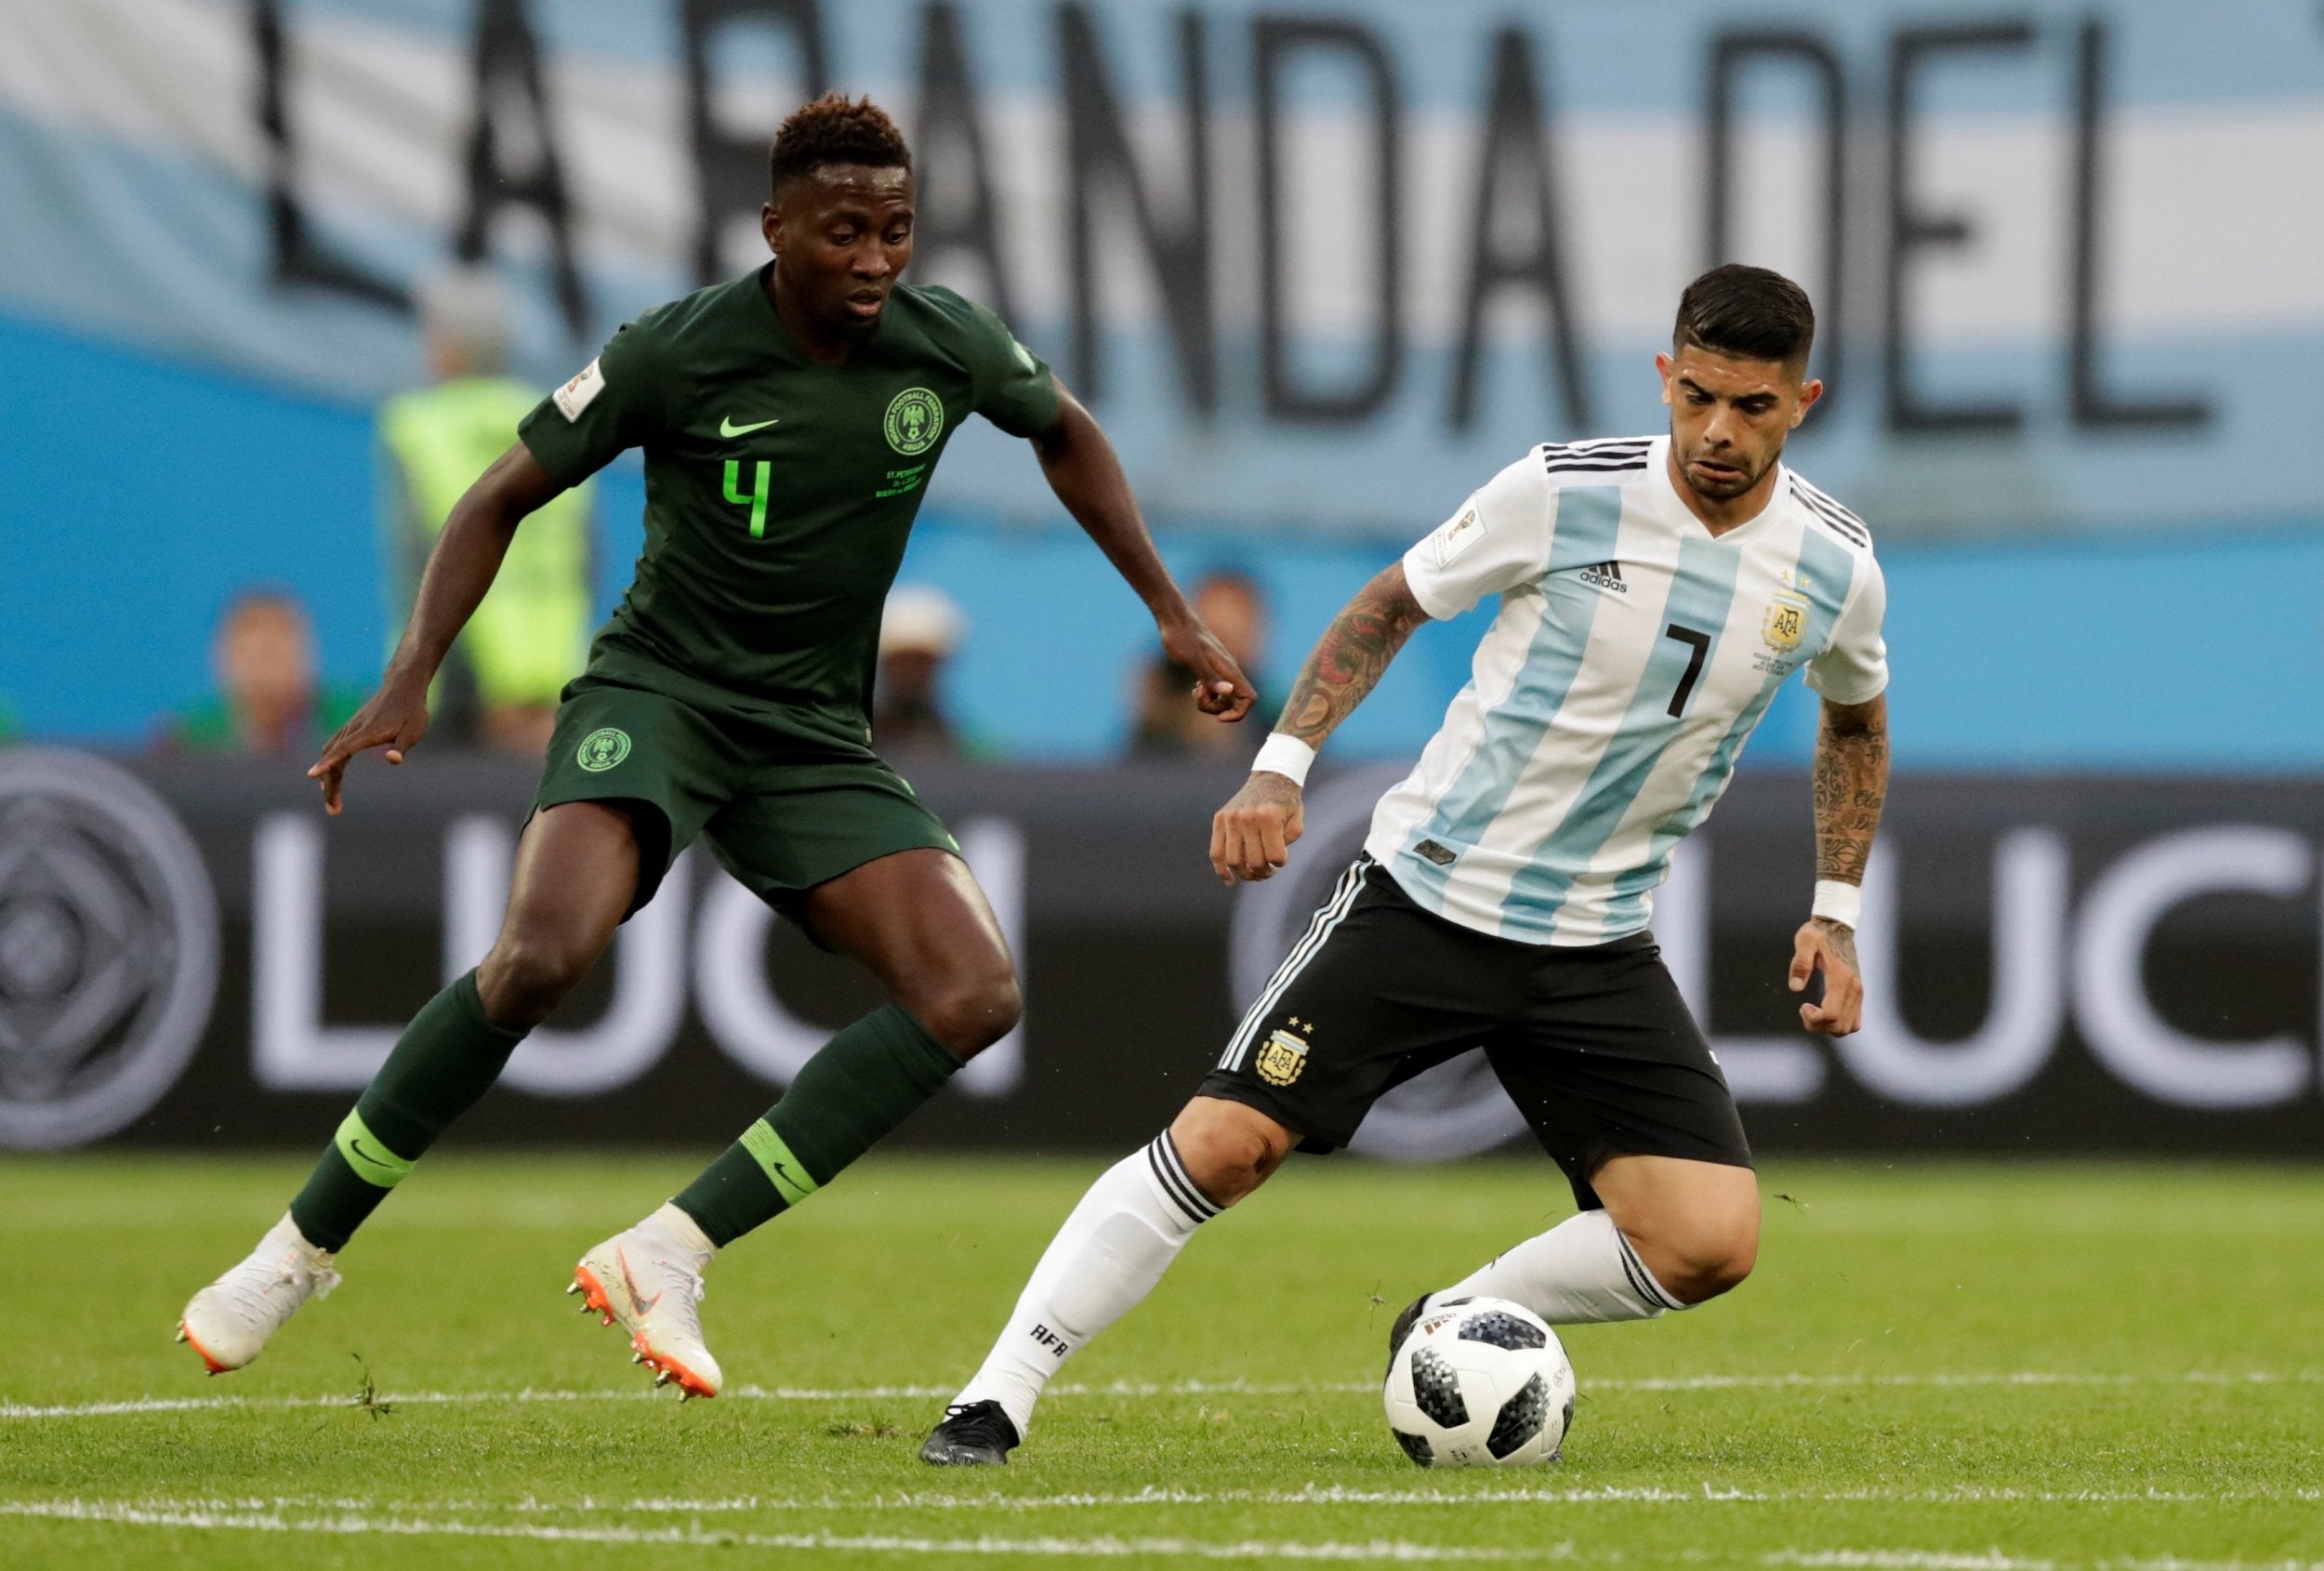 Argentina's Ever Banega in action with Nigeria's Wilfred Ndidi